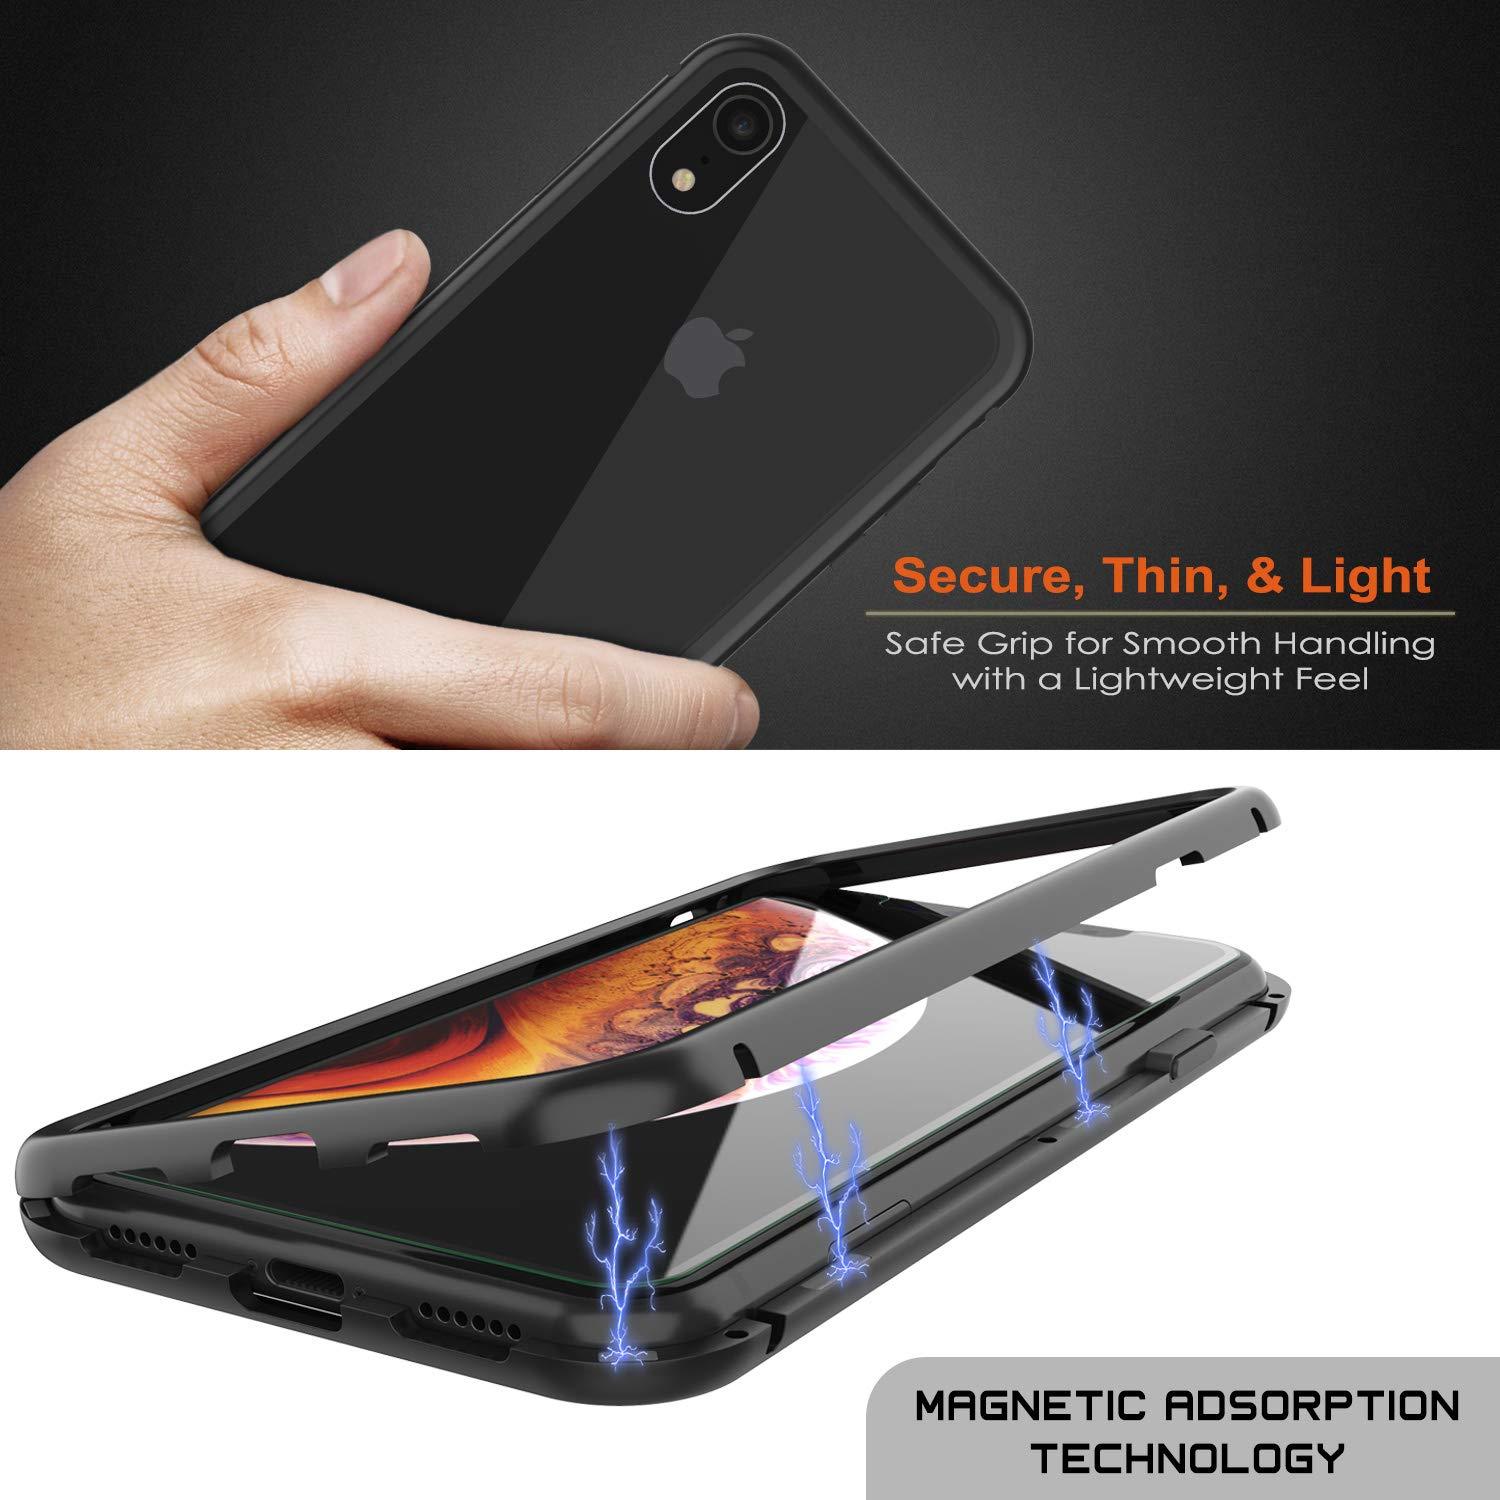 iPhone XR Case, Punkcase Magnetic Shield Protective TPU Cover W/ Tempered Glass Screen Protector [Black]